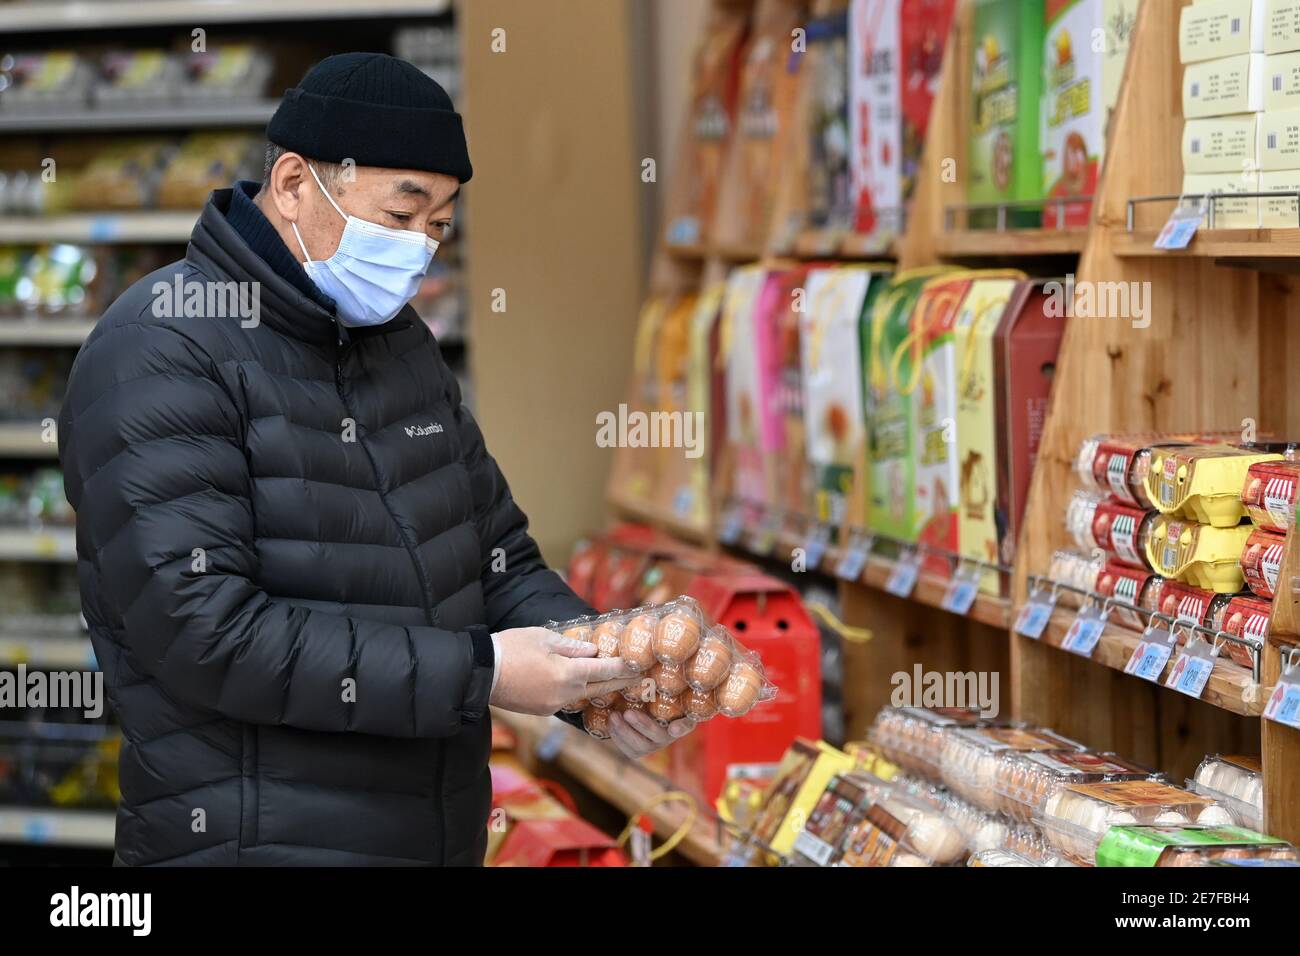 Harbin, China's Heilongjiang Province. 30th Jan, 2021. A resident selects eggs at a supermarket in Xiangfang District of Harbin, northeast China's Heilongjiang Province, Jan. 30, 2021. Price and supply of daily necessities are stable in Harbin amid the ongoing COVID-19 pandemic, local authorities told a press briefing here on Saturday. Credit: Wang Jianwei/Xinhua/Alamy Live News Stock Photo